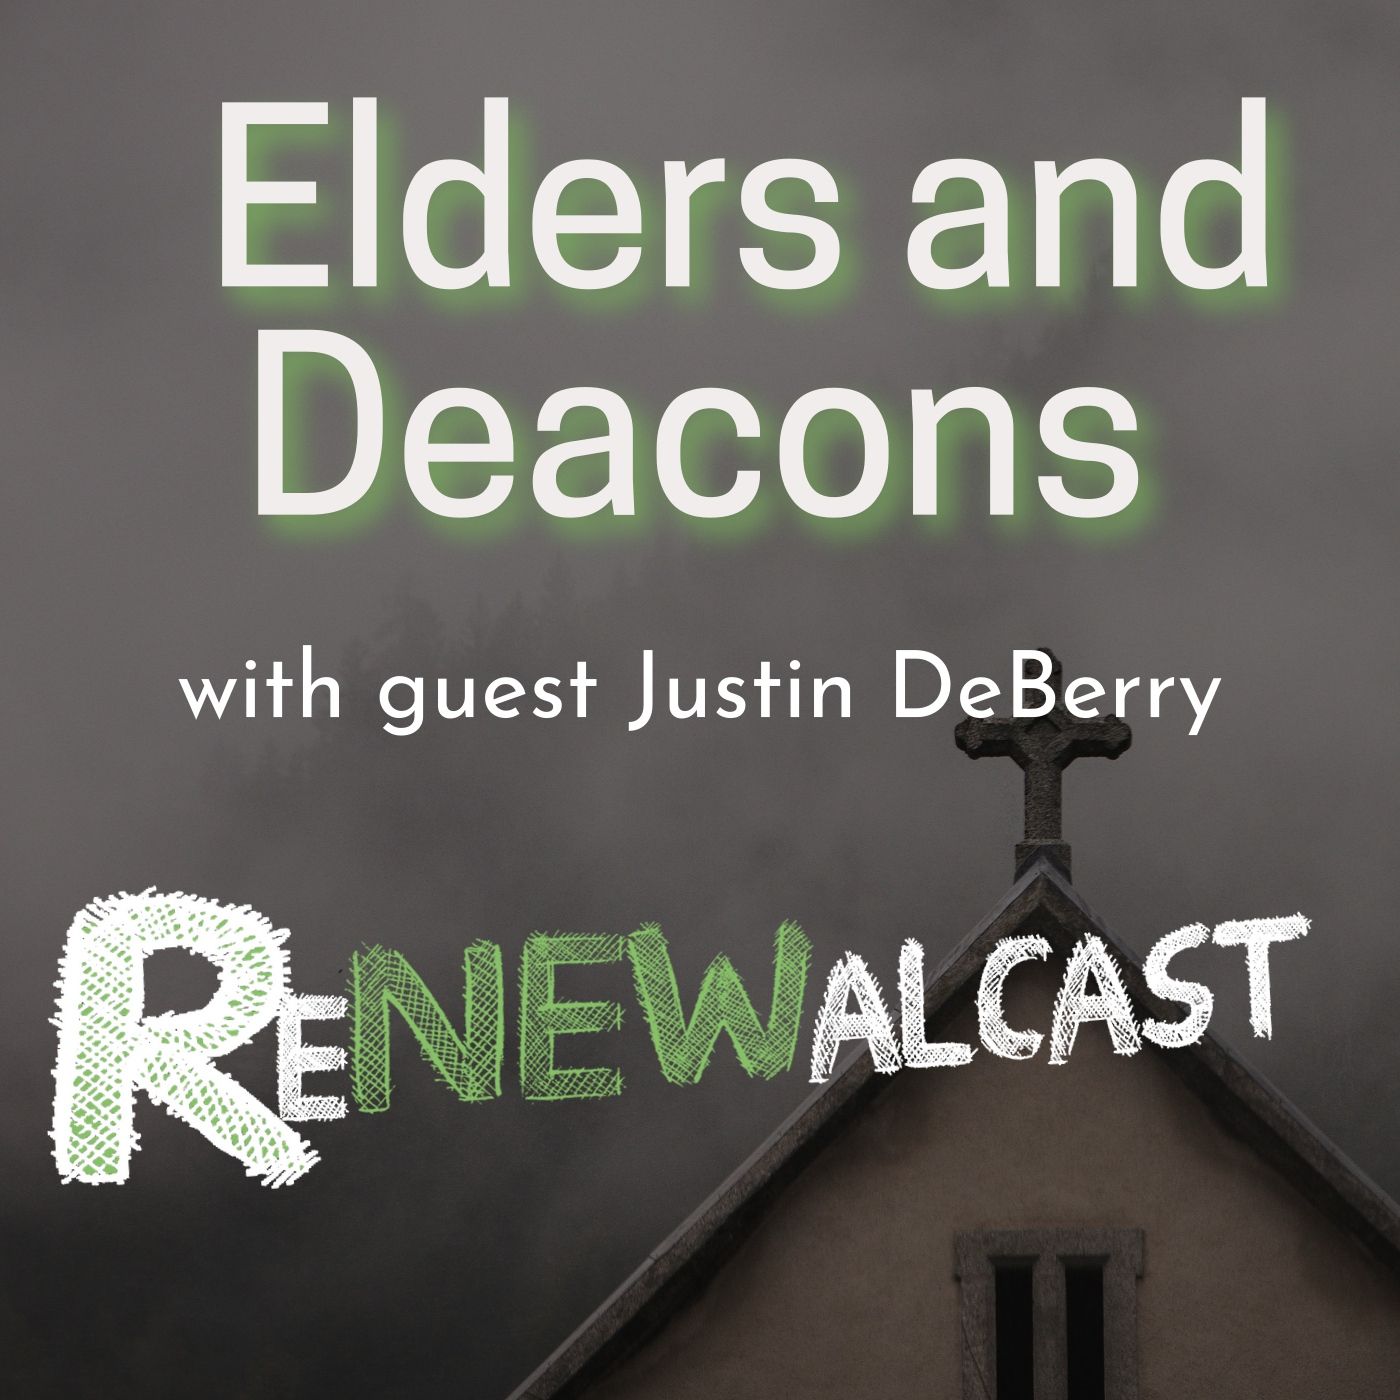 Elders and Deacons with guest Justin DeBerry